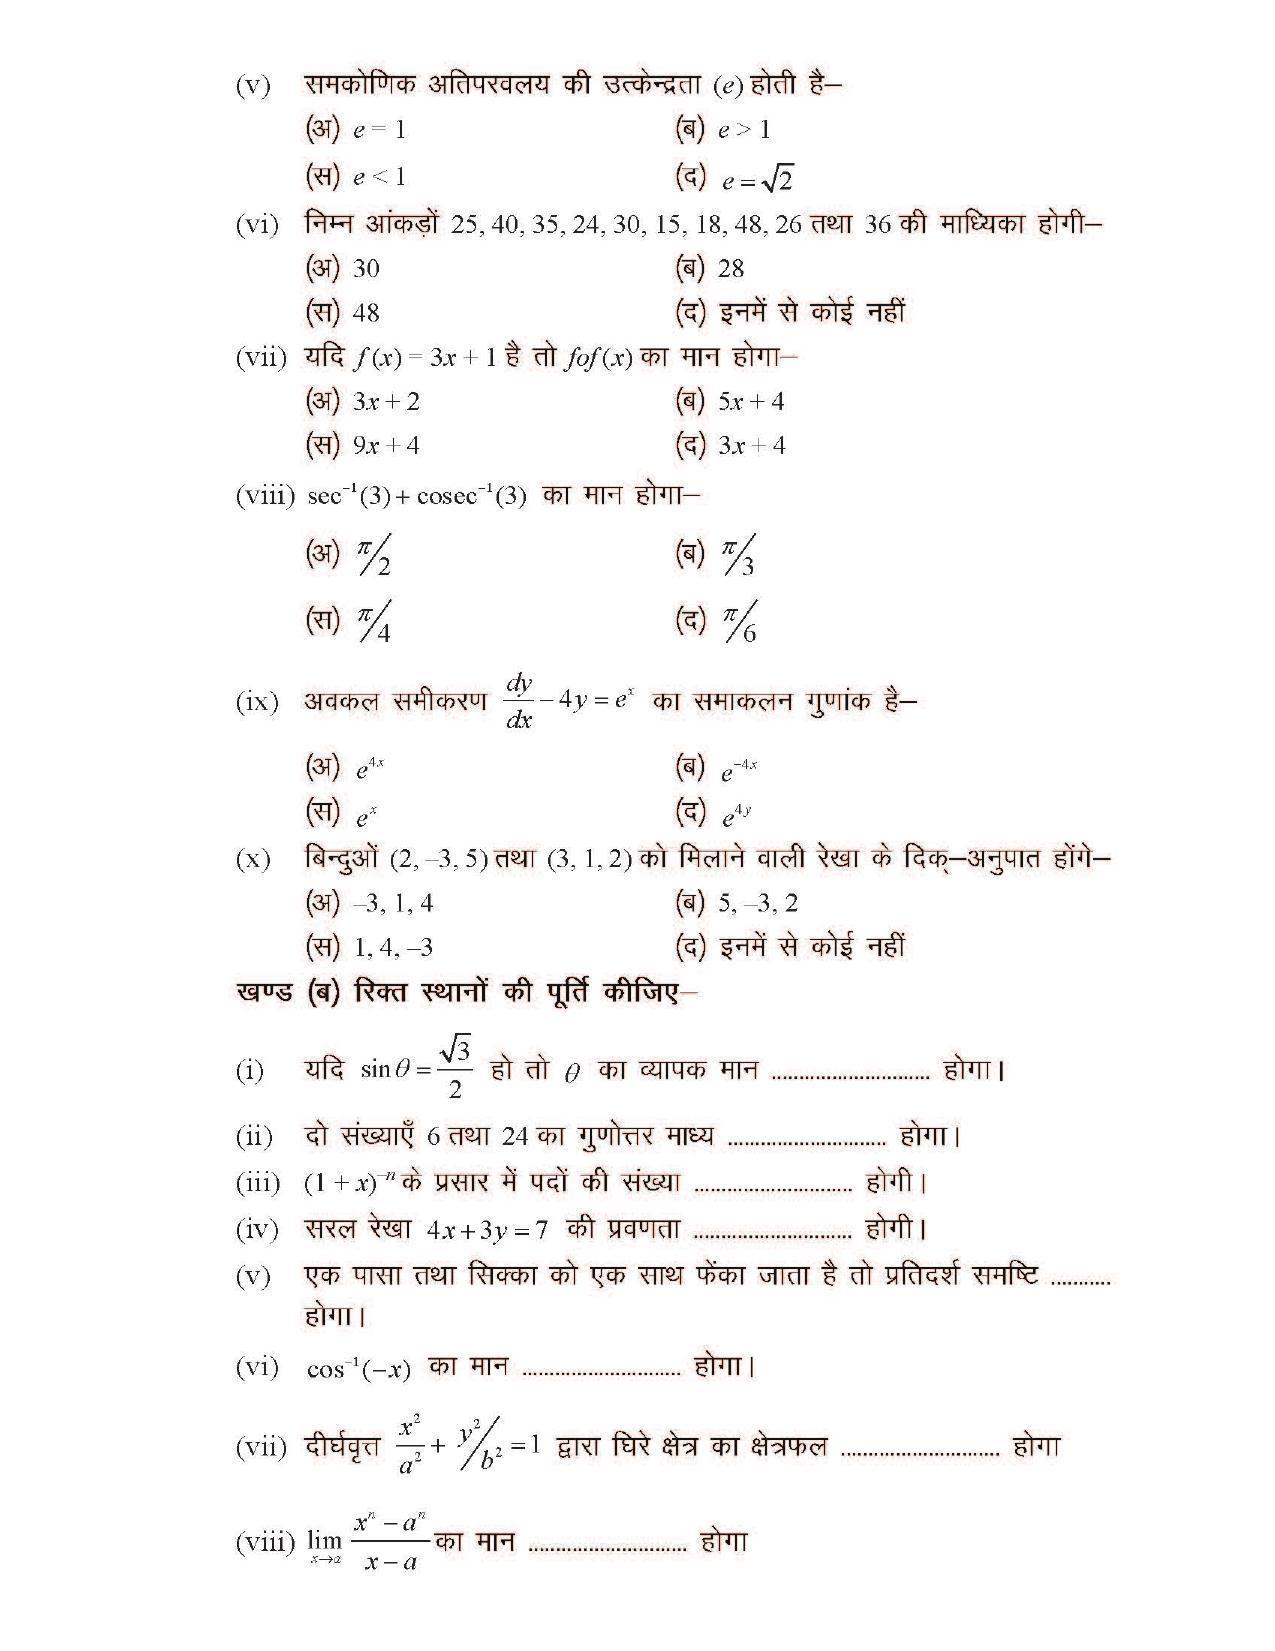 CGSOS Class 12 Model Question Paper - Maths - II - Page 2